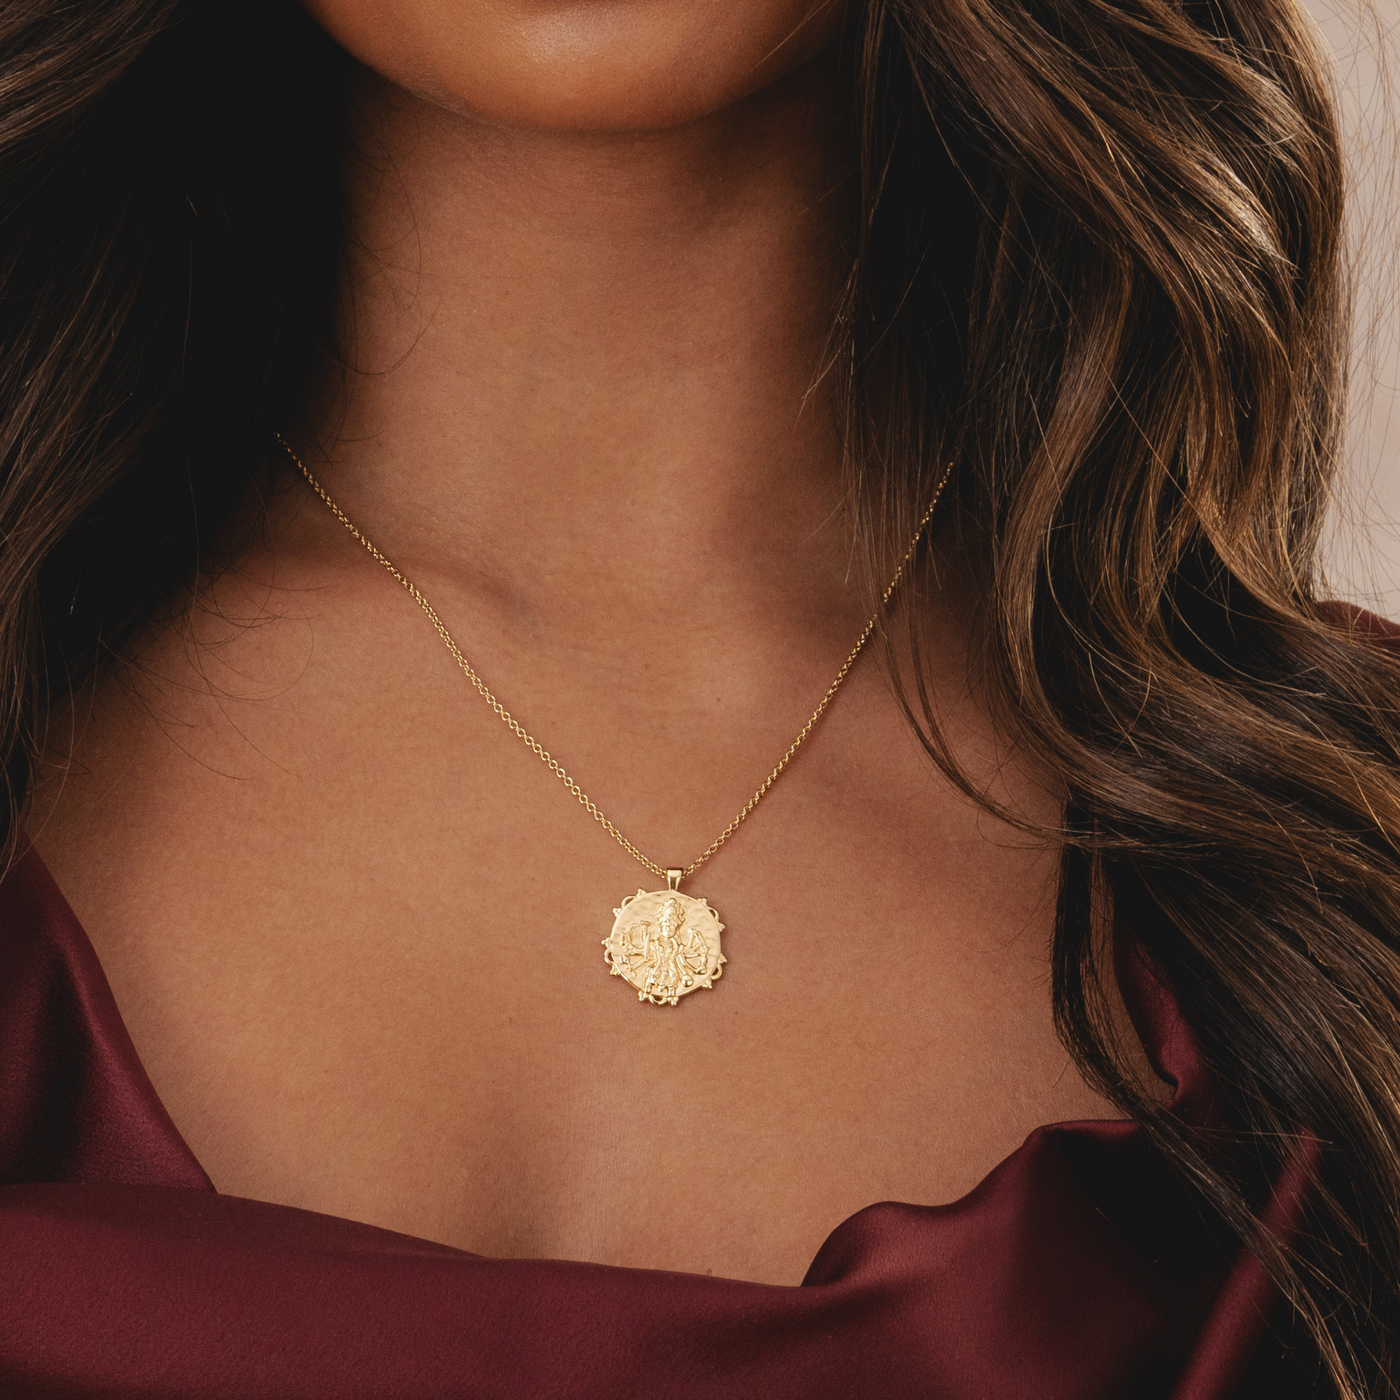 Resilience in design: Rani & Co.'s Kali Goddess Hammered Gold Necklace, sustainable elegance for the empowered woman